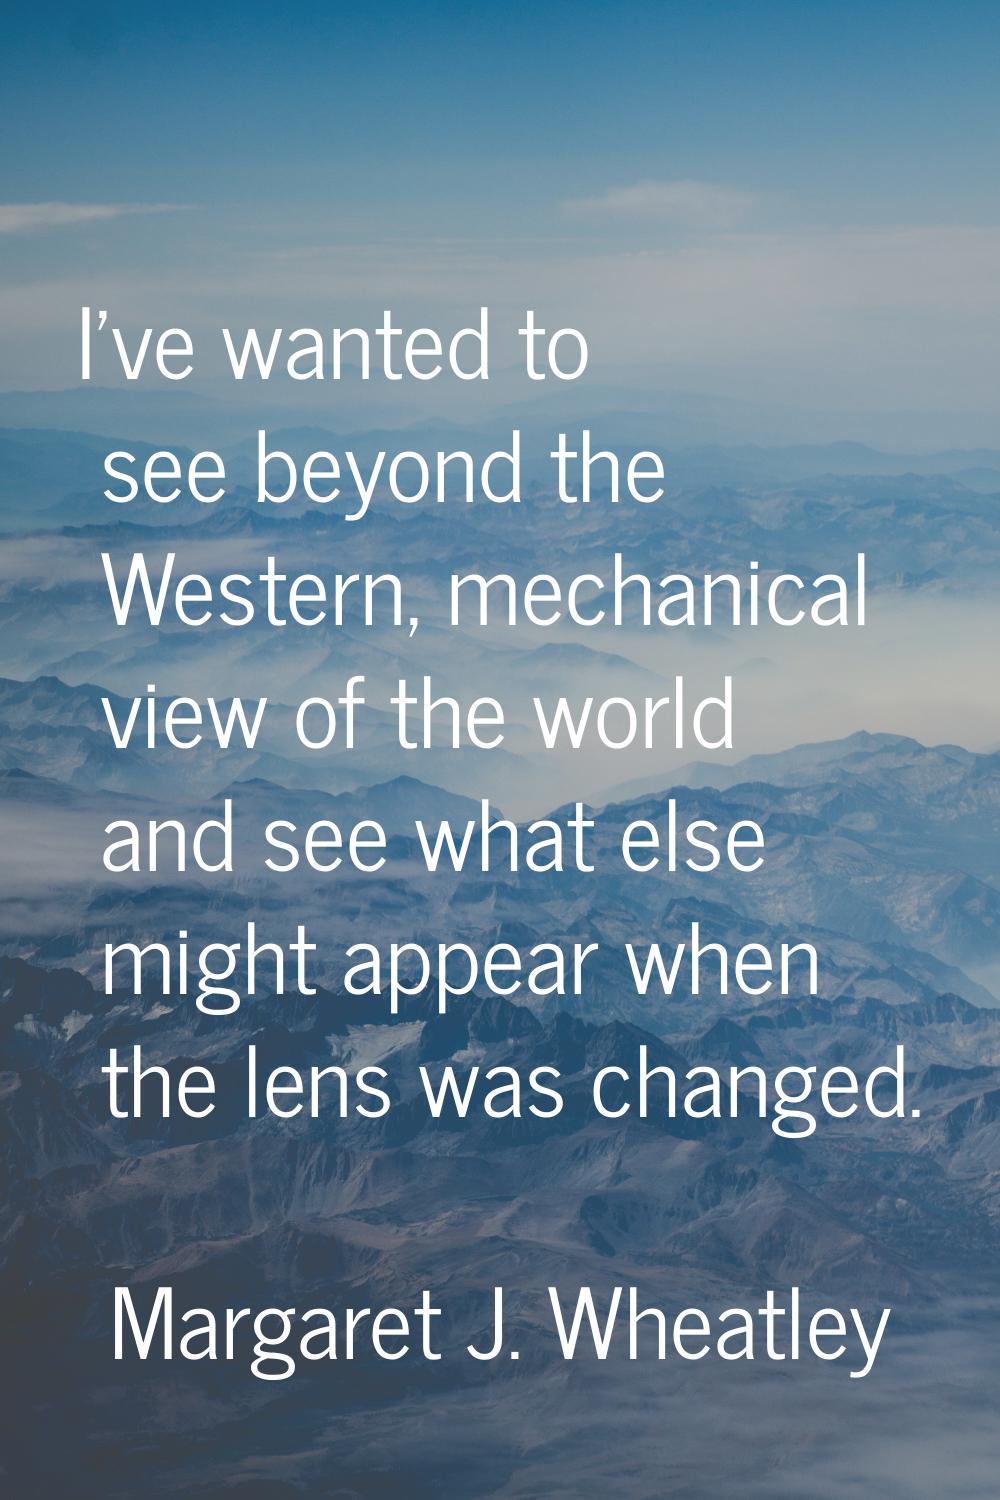 I've wanted to see beyond the Western, mechanical view of the world and see what else might appear 